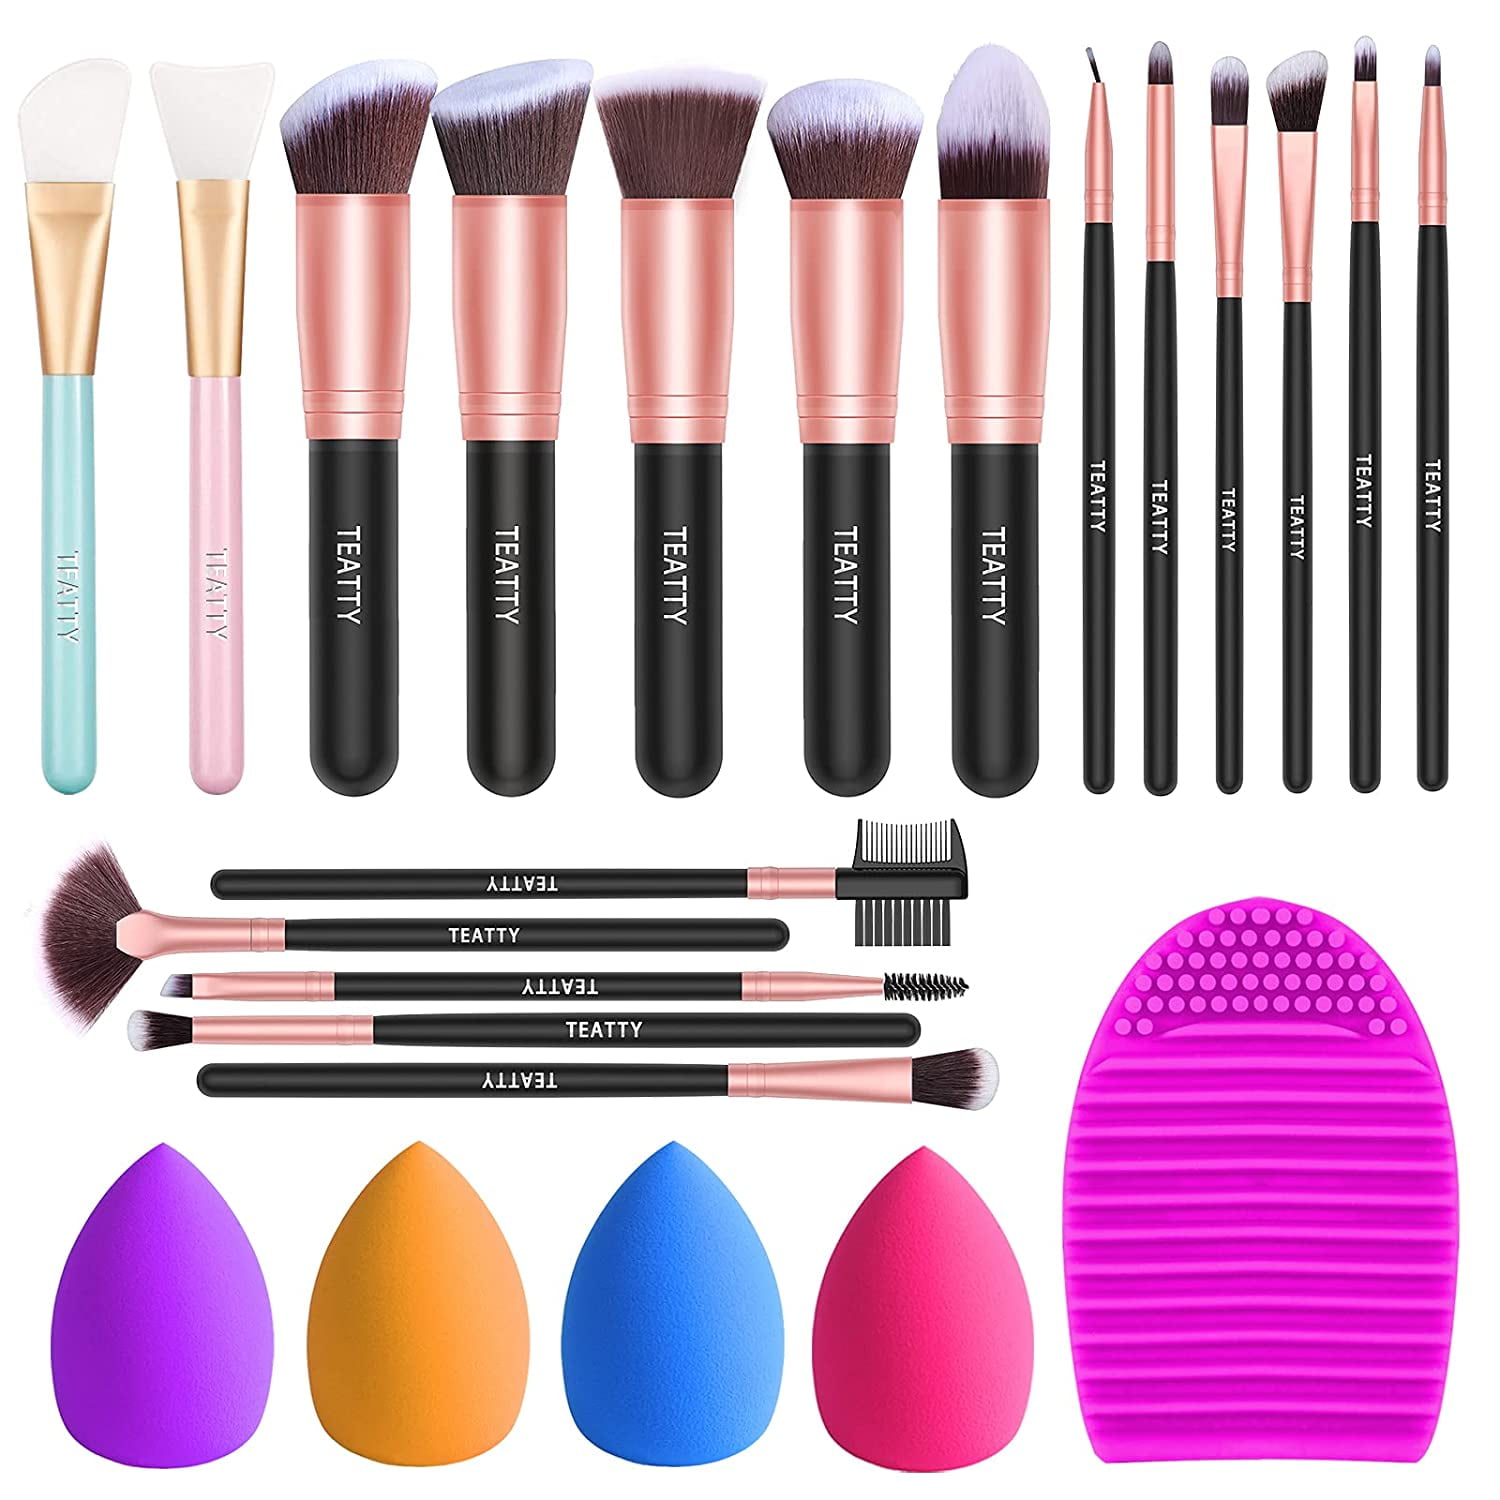 10 Best Makeup Brush Cleaners for 2022 - How to Clean Makeup Brushes